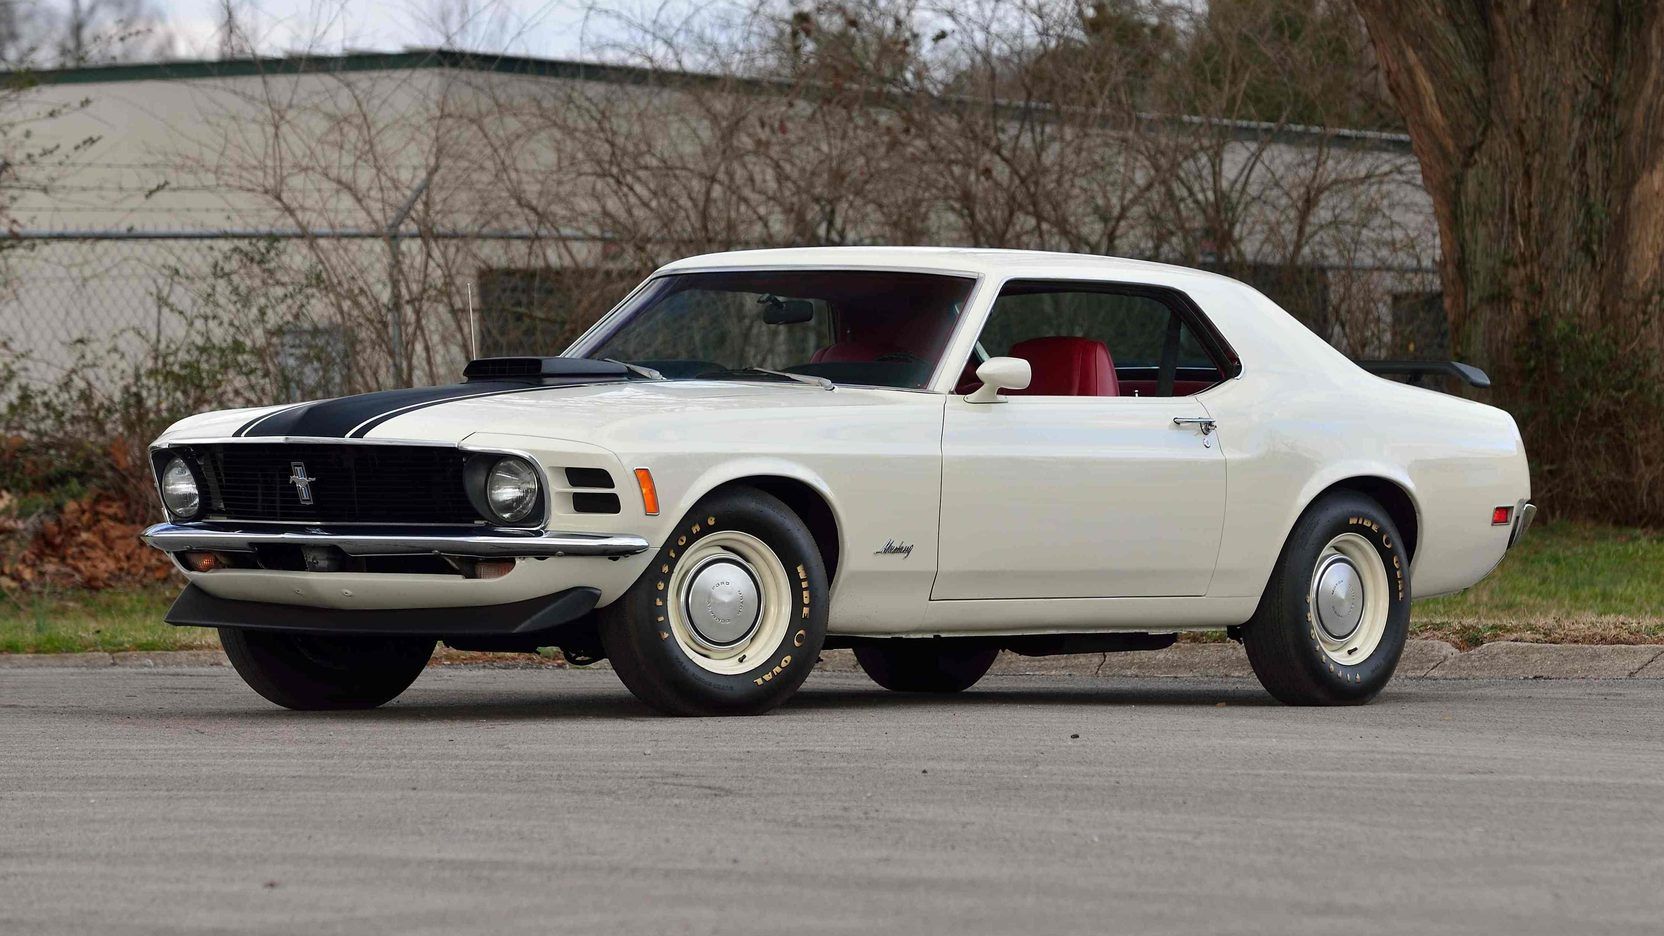 White 1970 Ford Mustang Coupe on the road